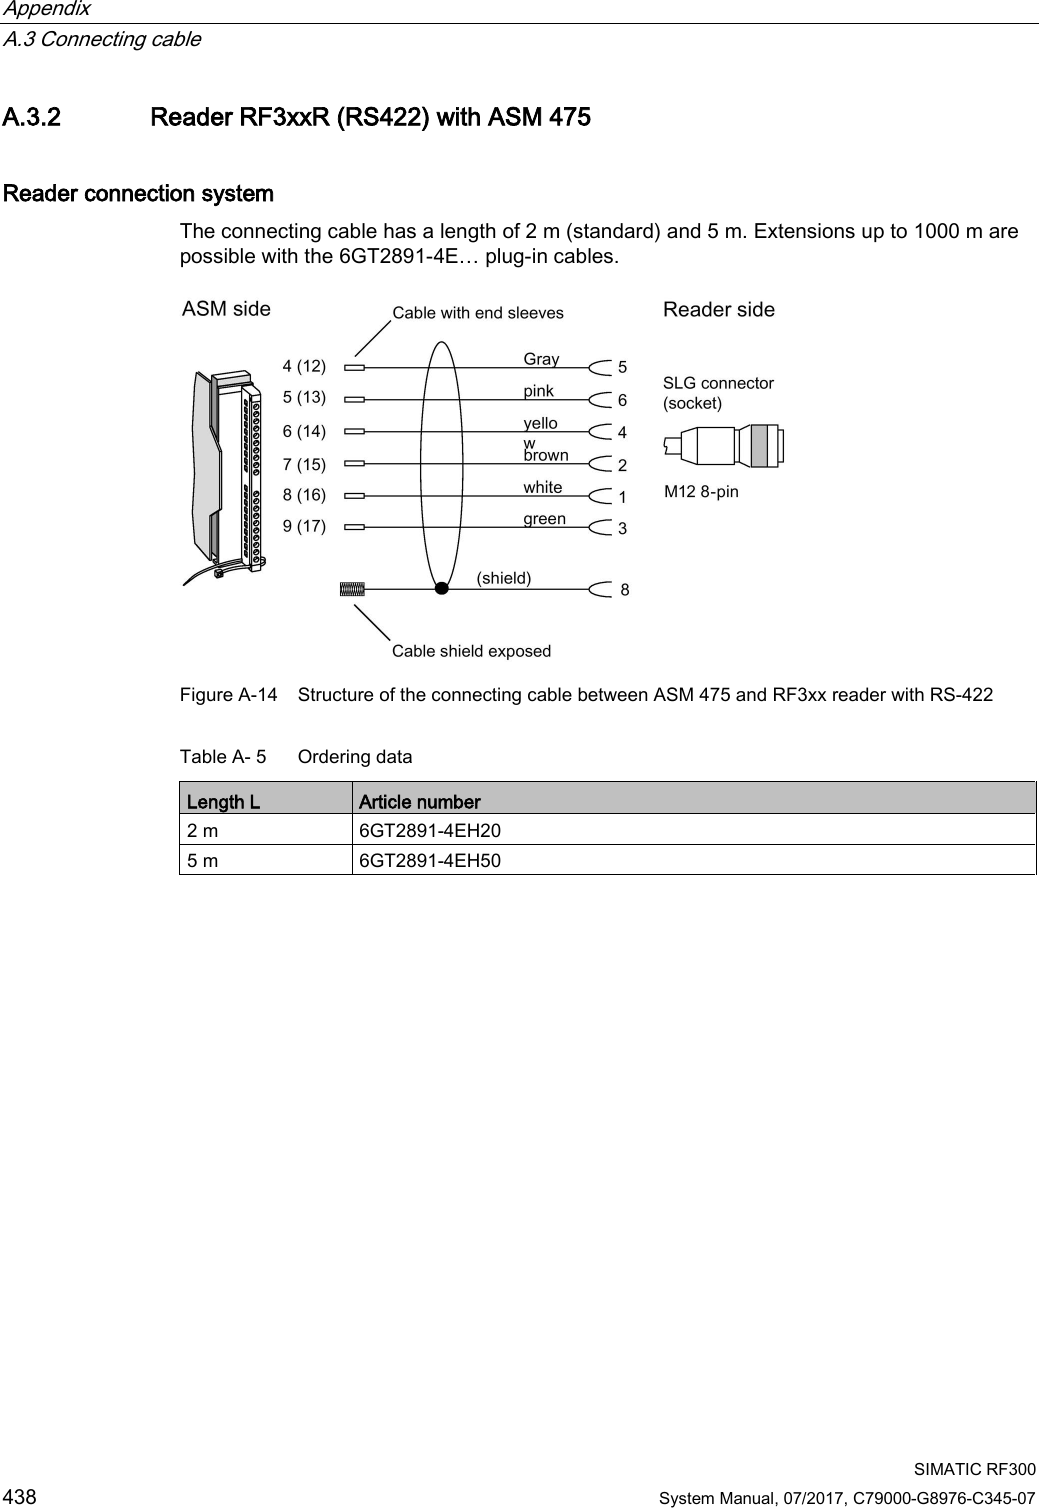 Appendix   A.3 Connecting cable  SIMATIC RF300 438 System Manual, 07/2017, C79000-G8976-C345-07 A.3.2 Reader RF3xxR (RS422) with ASM 475 Reader connection system The connecting cable has a length of 2 m (standard) and 5 m. Extensions up to 1000 m are possible with the 6GT2891-4E… plug-in cables.   Figure A-14 Structure of the connecting cable between ASM 475 and RF3xx reader with RS-422 Table A- 5  Ordering data Length L Article number 2 m 6GT2891-4EH20 5 m 6GT2891-4EH50 